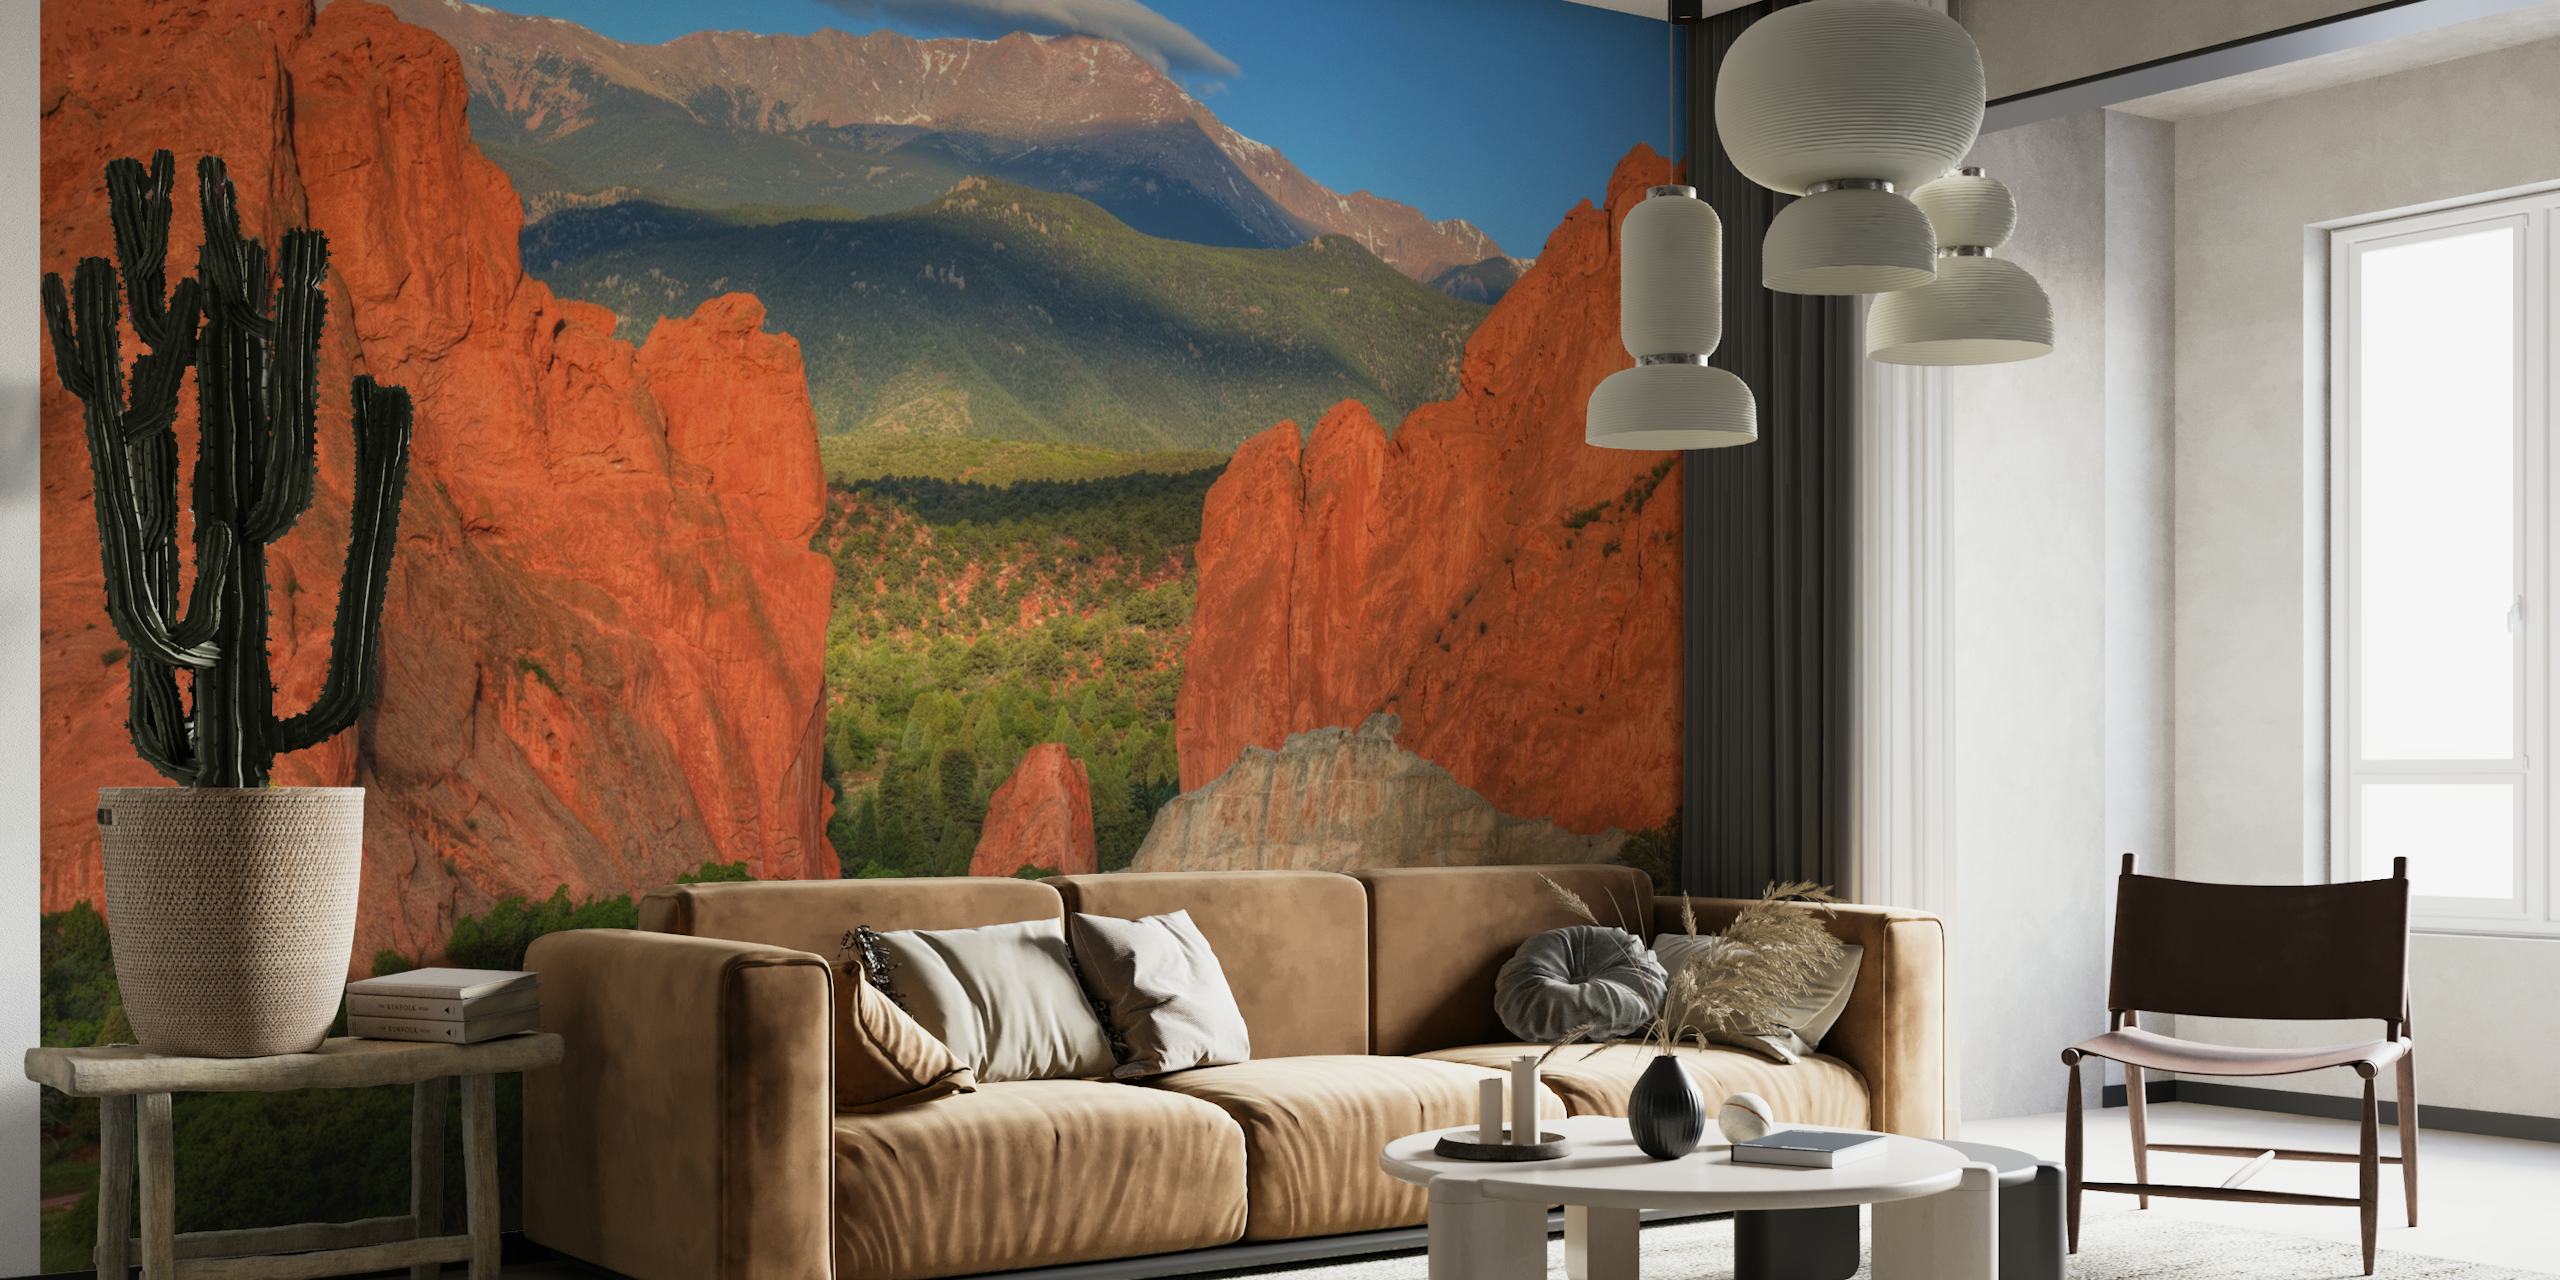 Mountain landscape wall mural with warm golden light and red rock formations